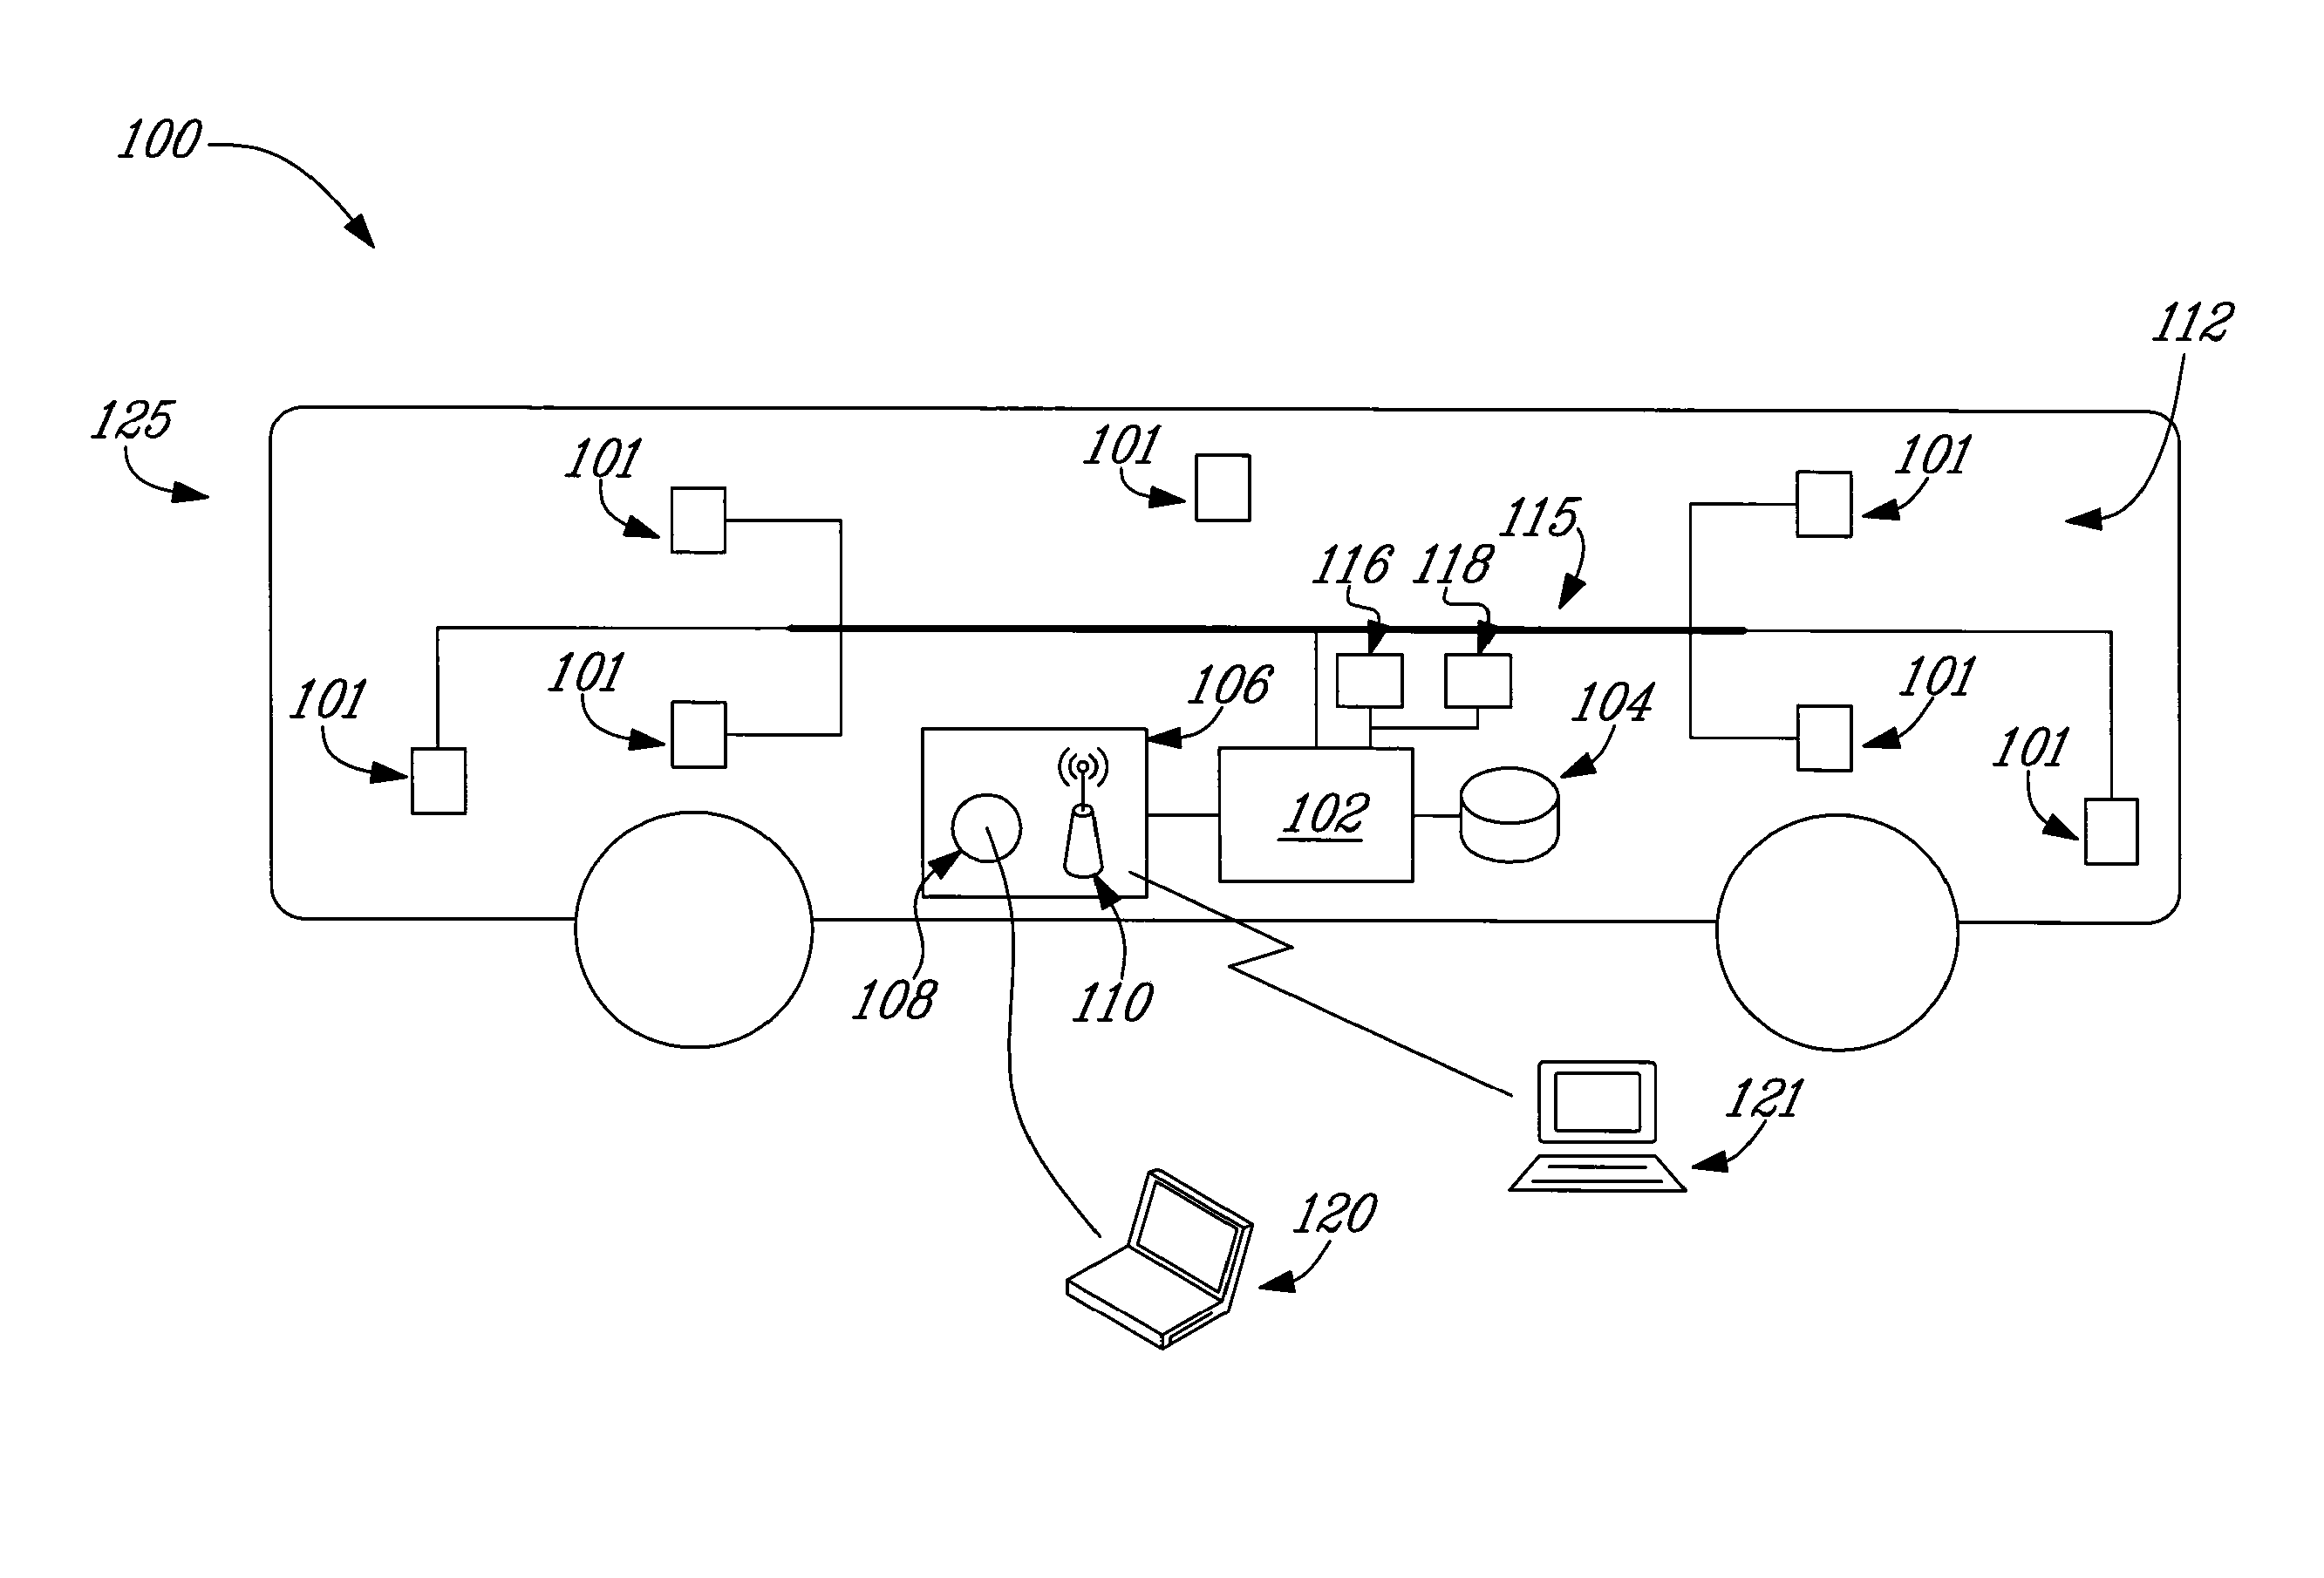 System and method for monitoring operation of vehicles